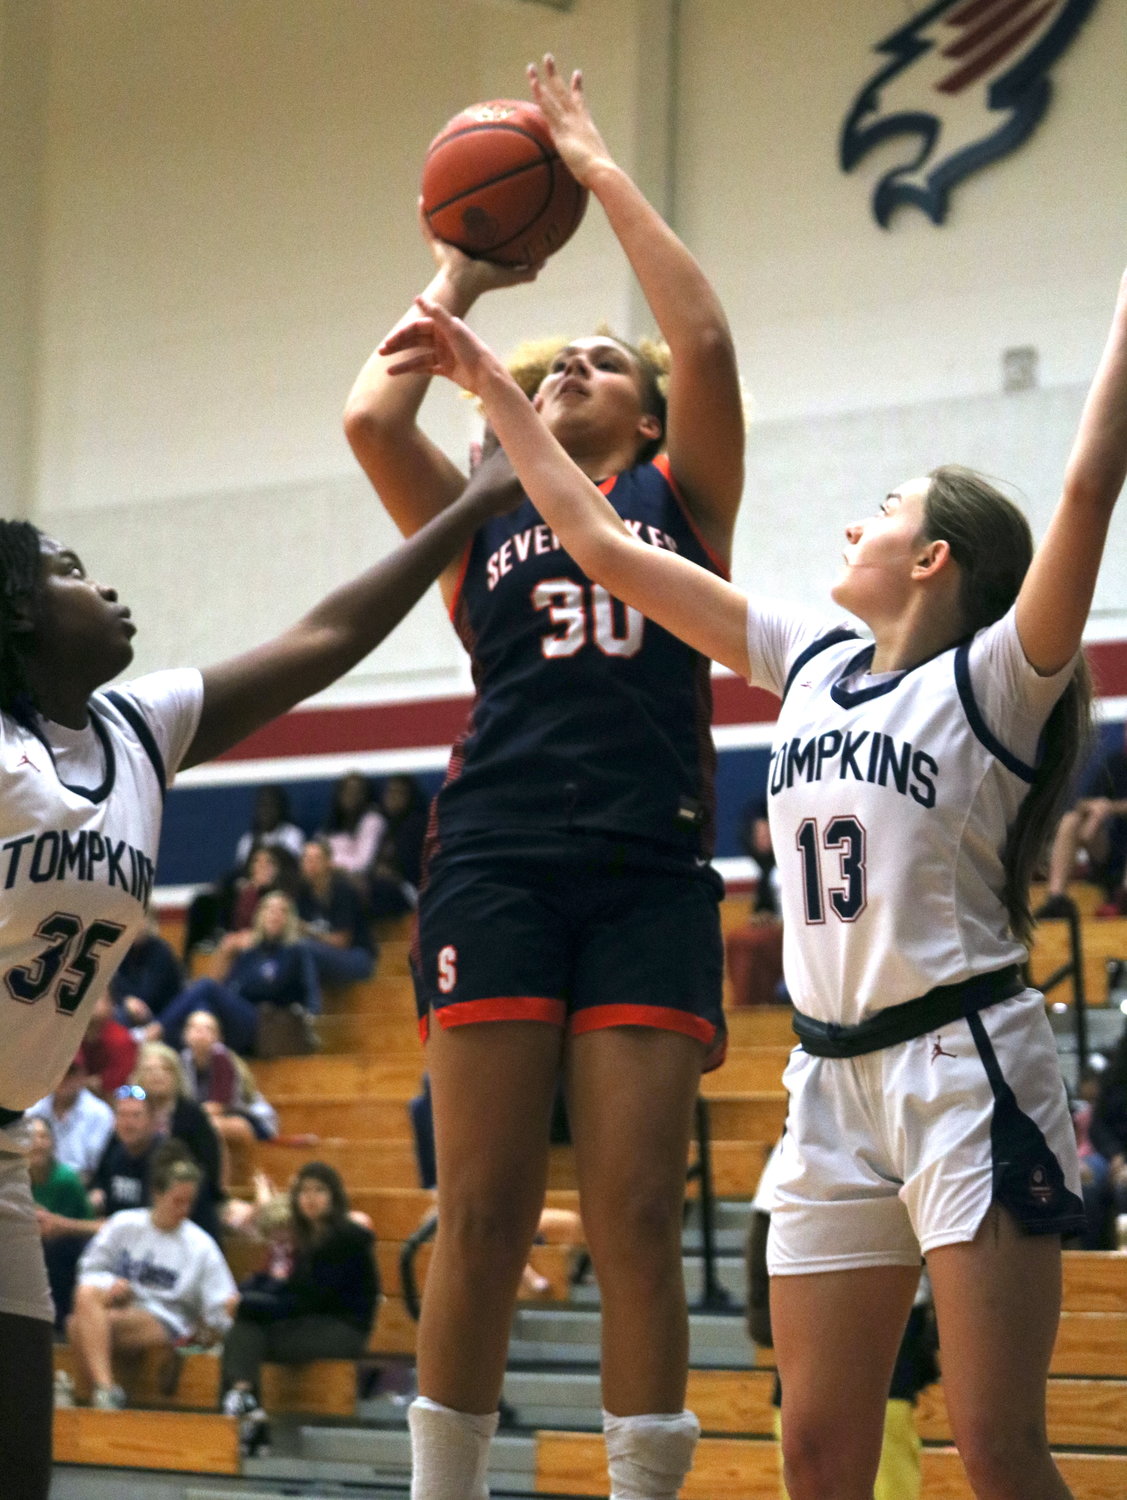 Justice Carlton shoots a jumper during Tuesday’s District 19-6A game between Tompkins and Seven Lakes at the Tompkins gym.